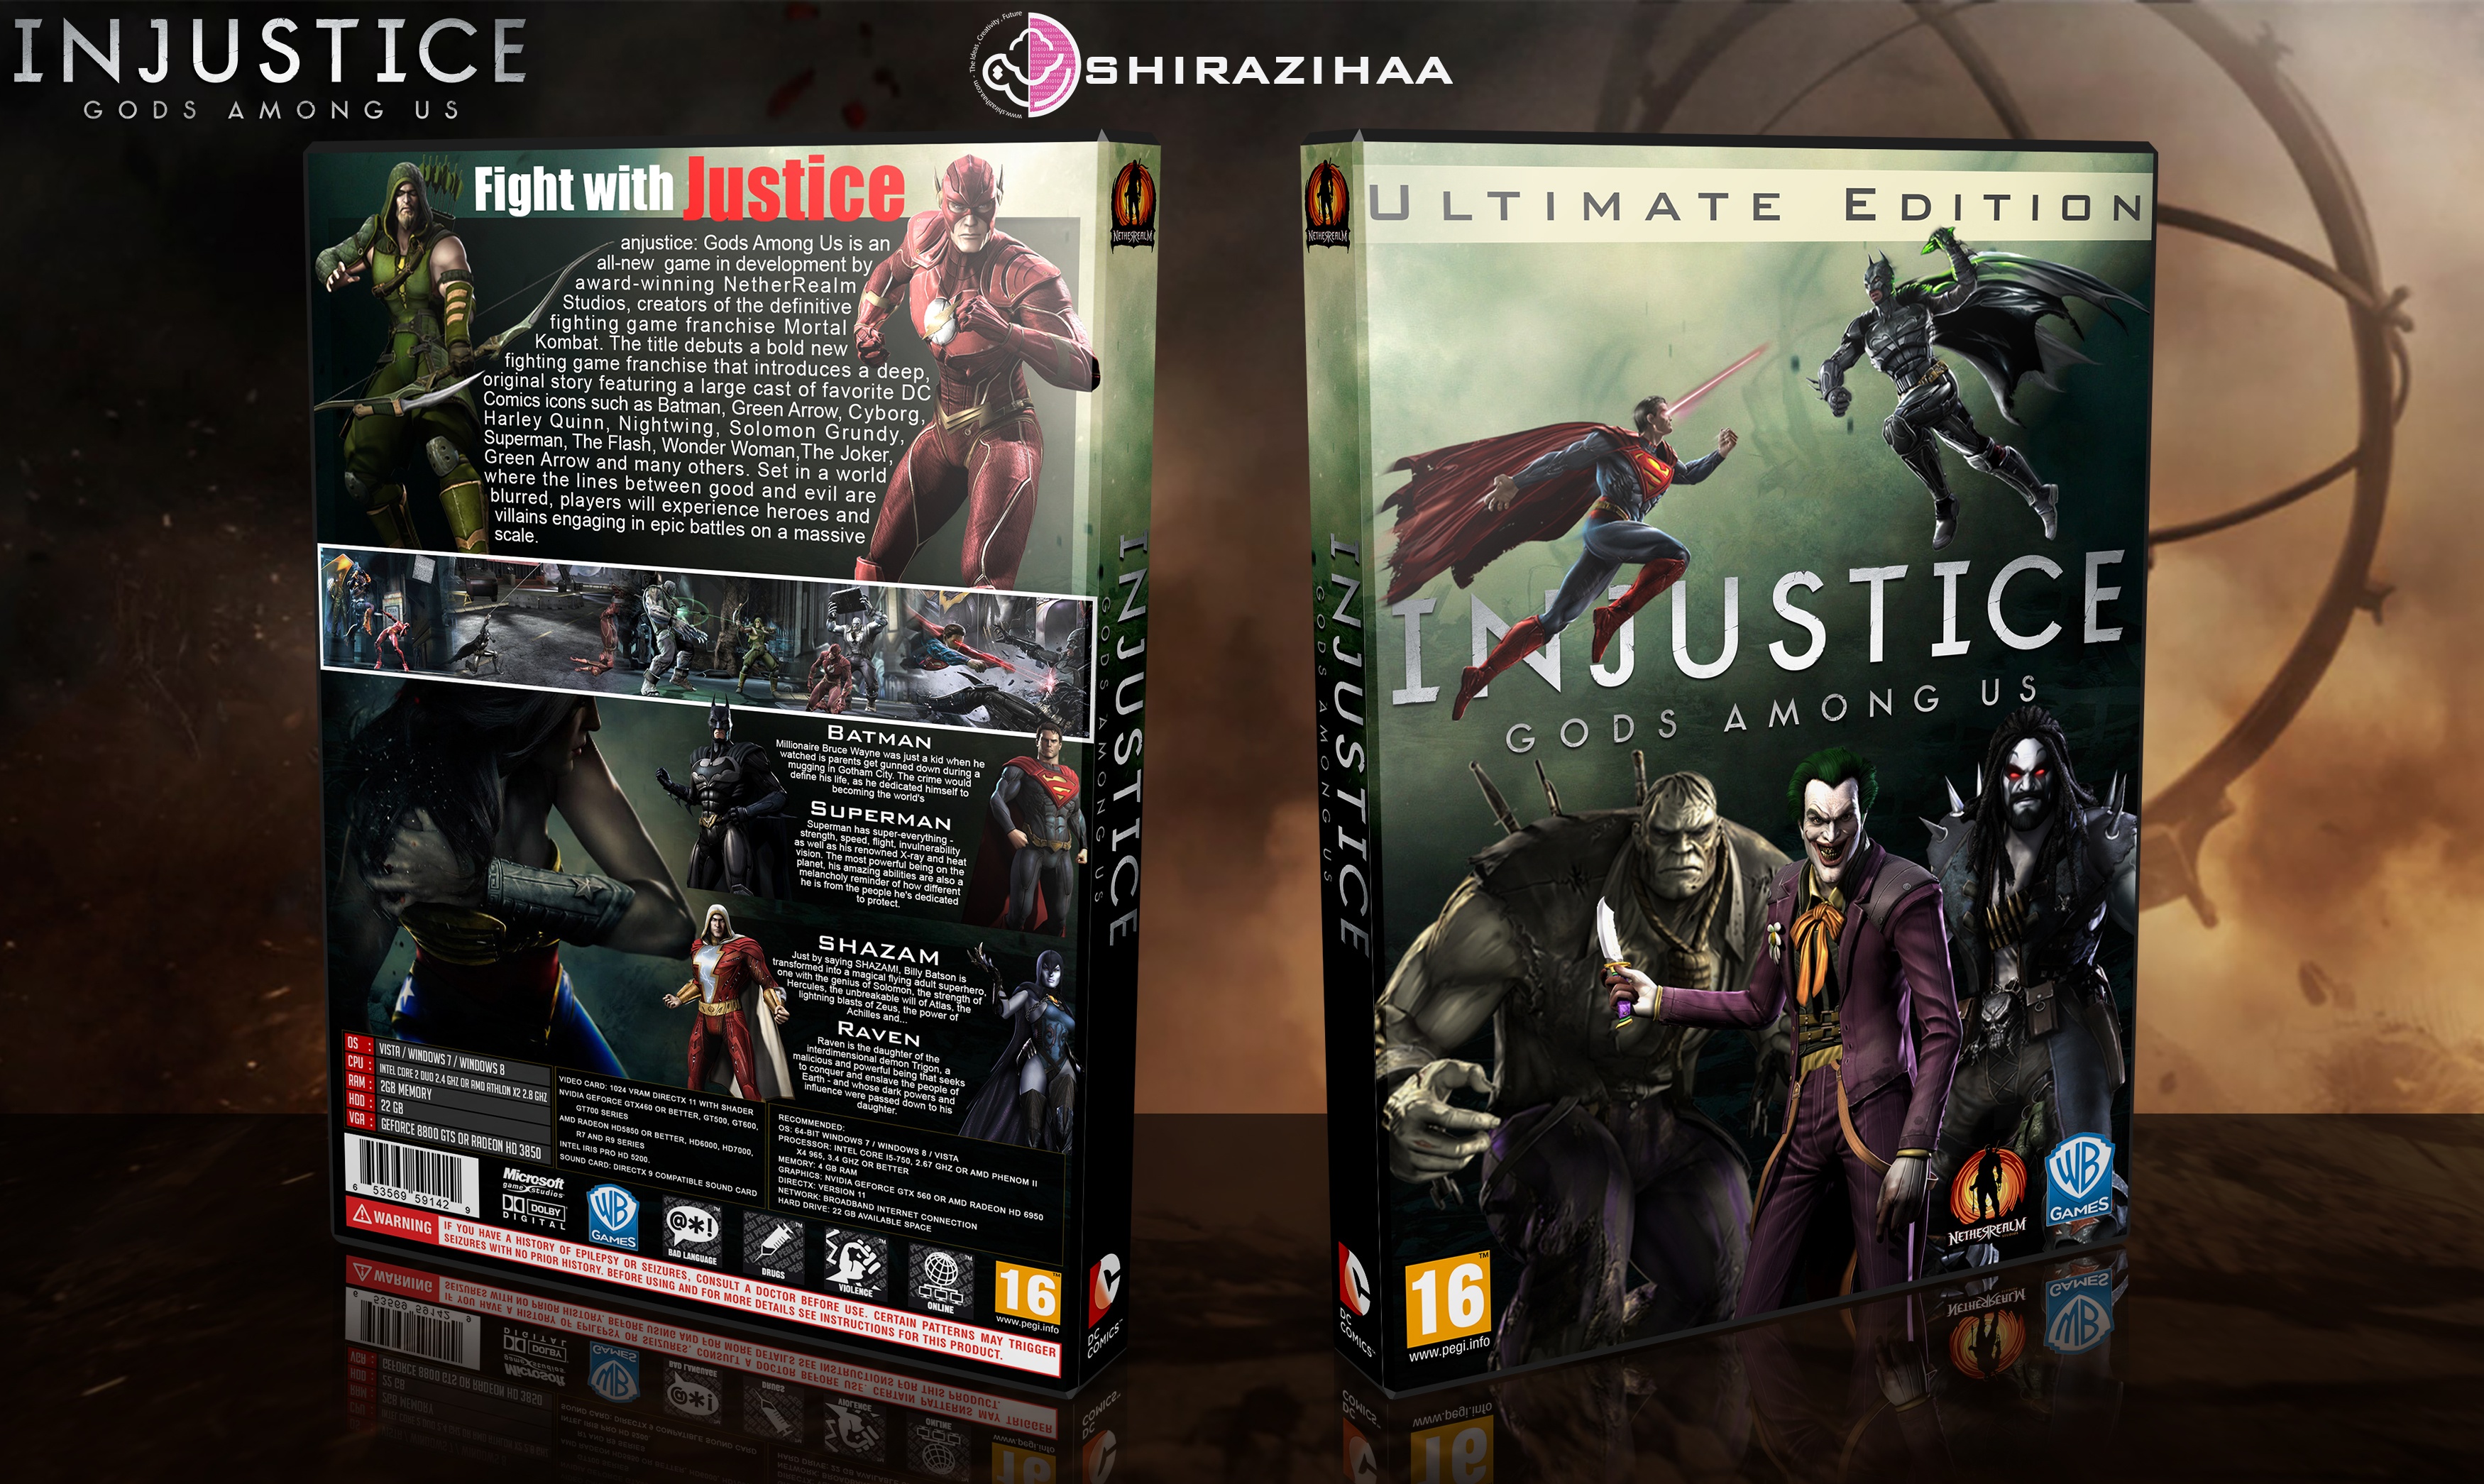 Injustice: Gods Among Us - Ultimate Edition box cover